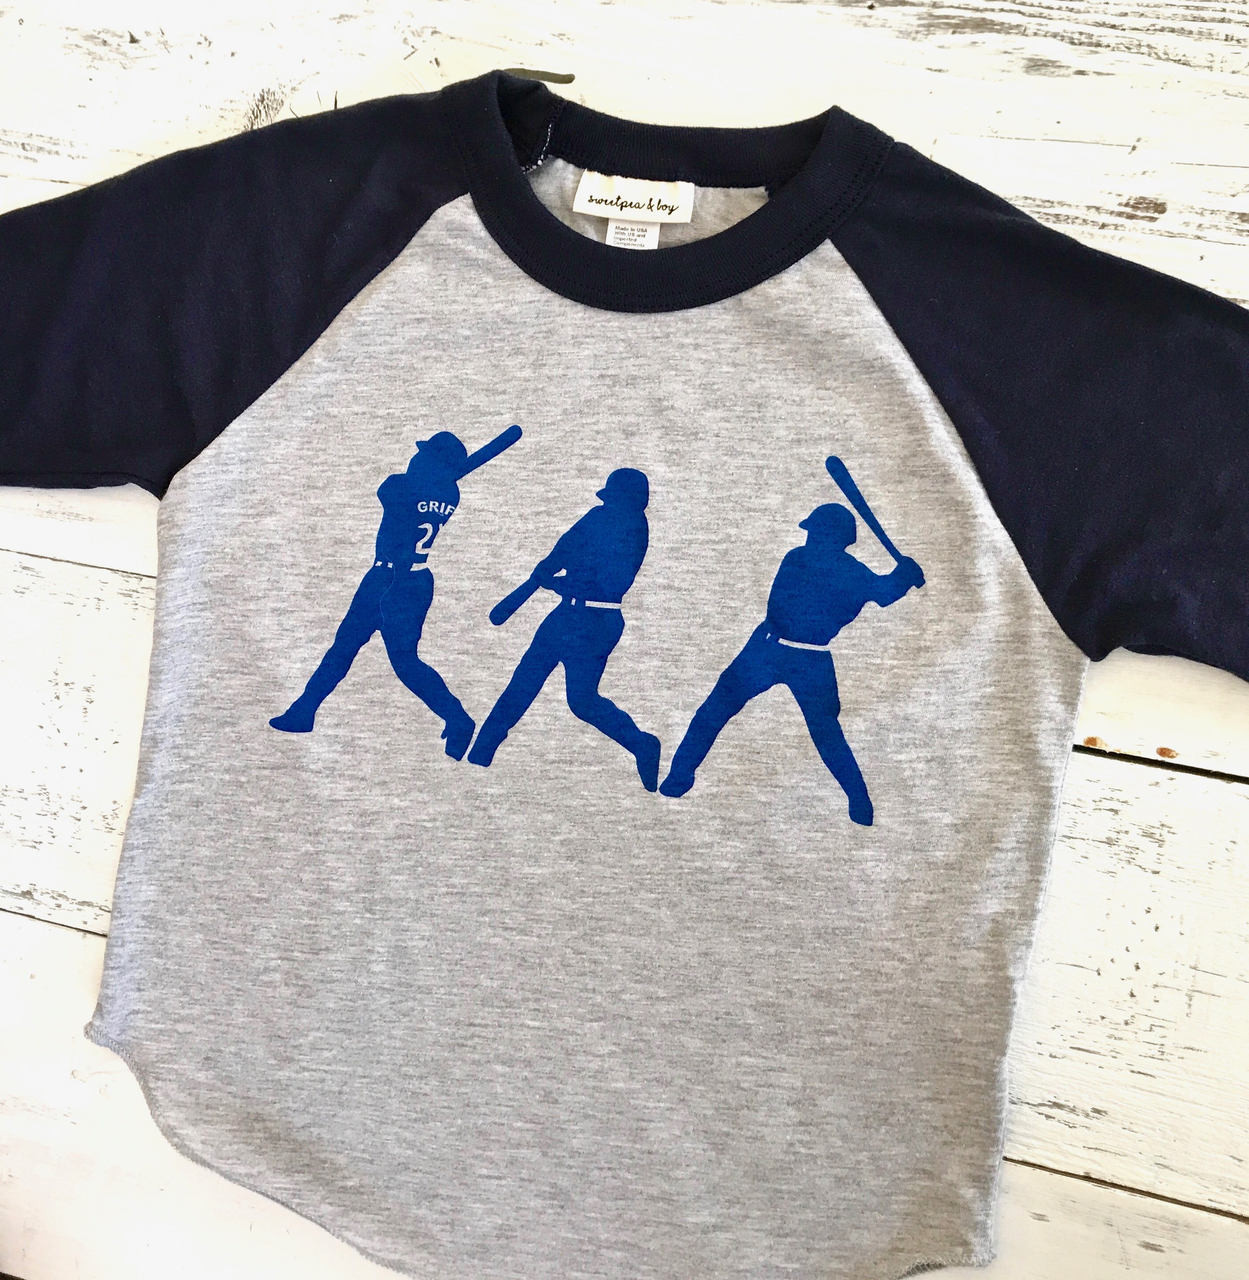 Ken Griffey Jr. Baby and Kids Baseball Shirt Print (Size: 6) | by Sweetpea and Boy